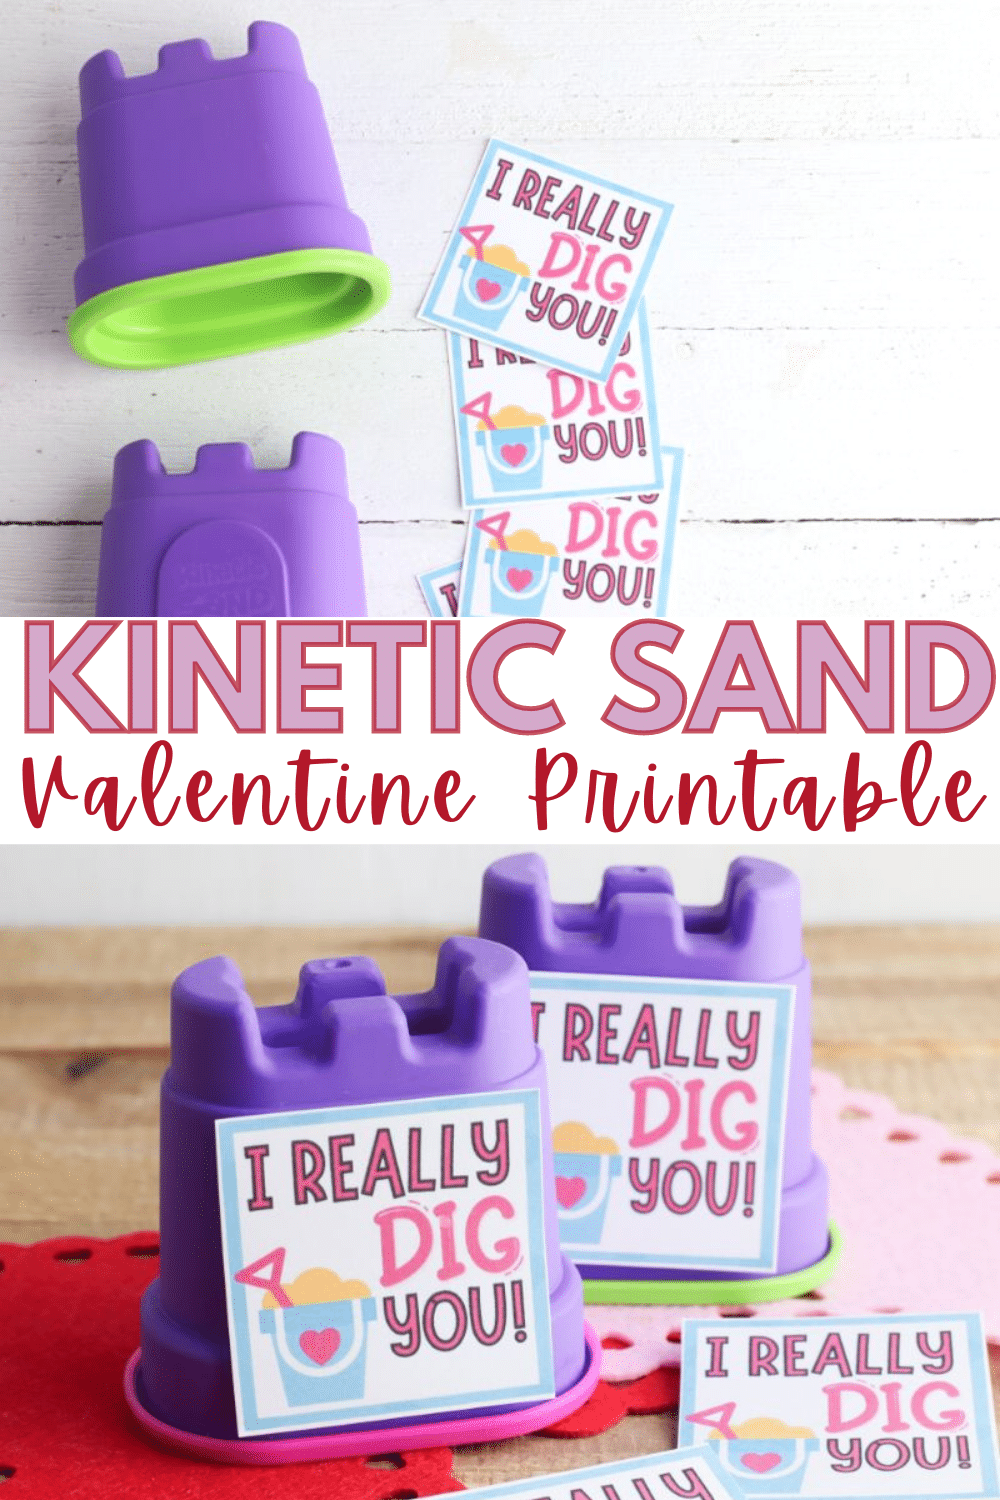 The kids are going to love this Kinetic Sand Valentine printable! This fun Valentine's Day printable makes a fun and unique gift! #valentinesday #valentine #kineticsand #freeprintable #forkids via @wondermomwannab